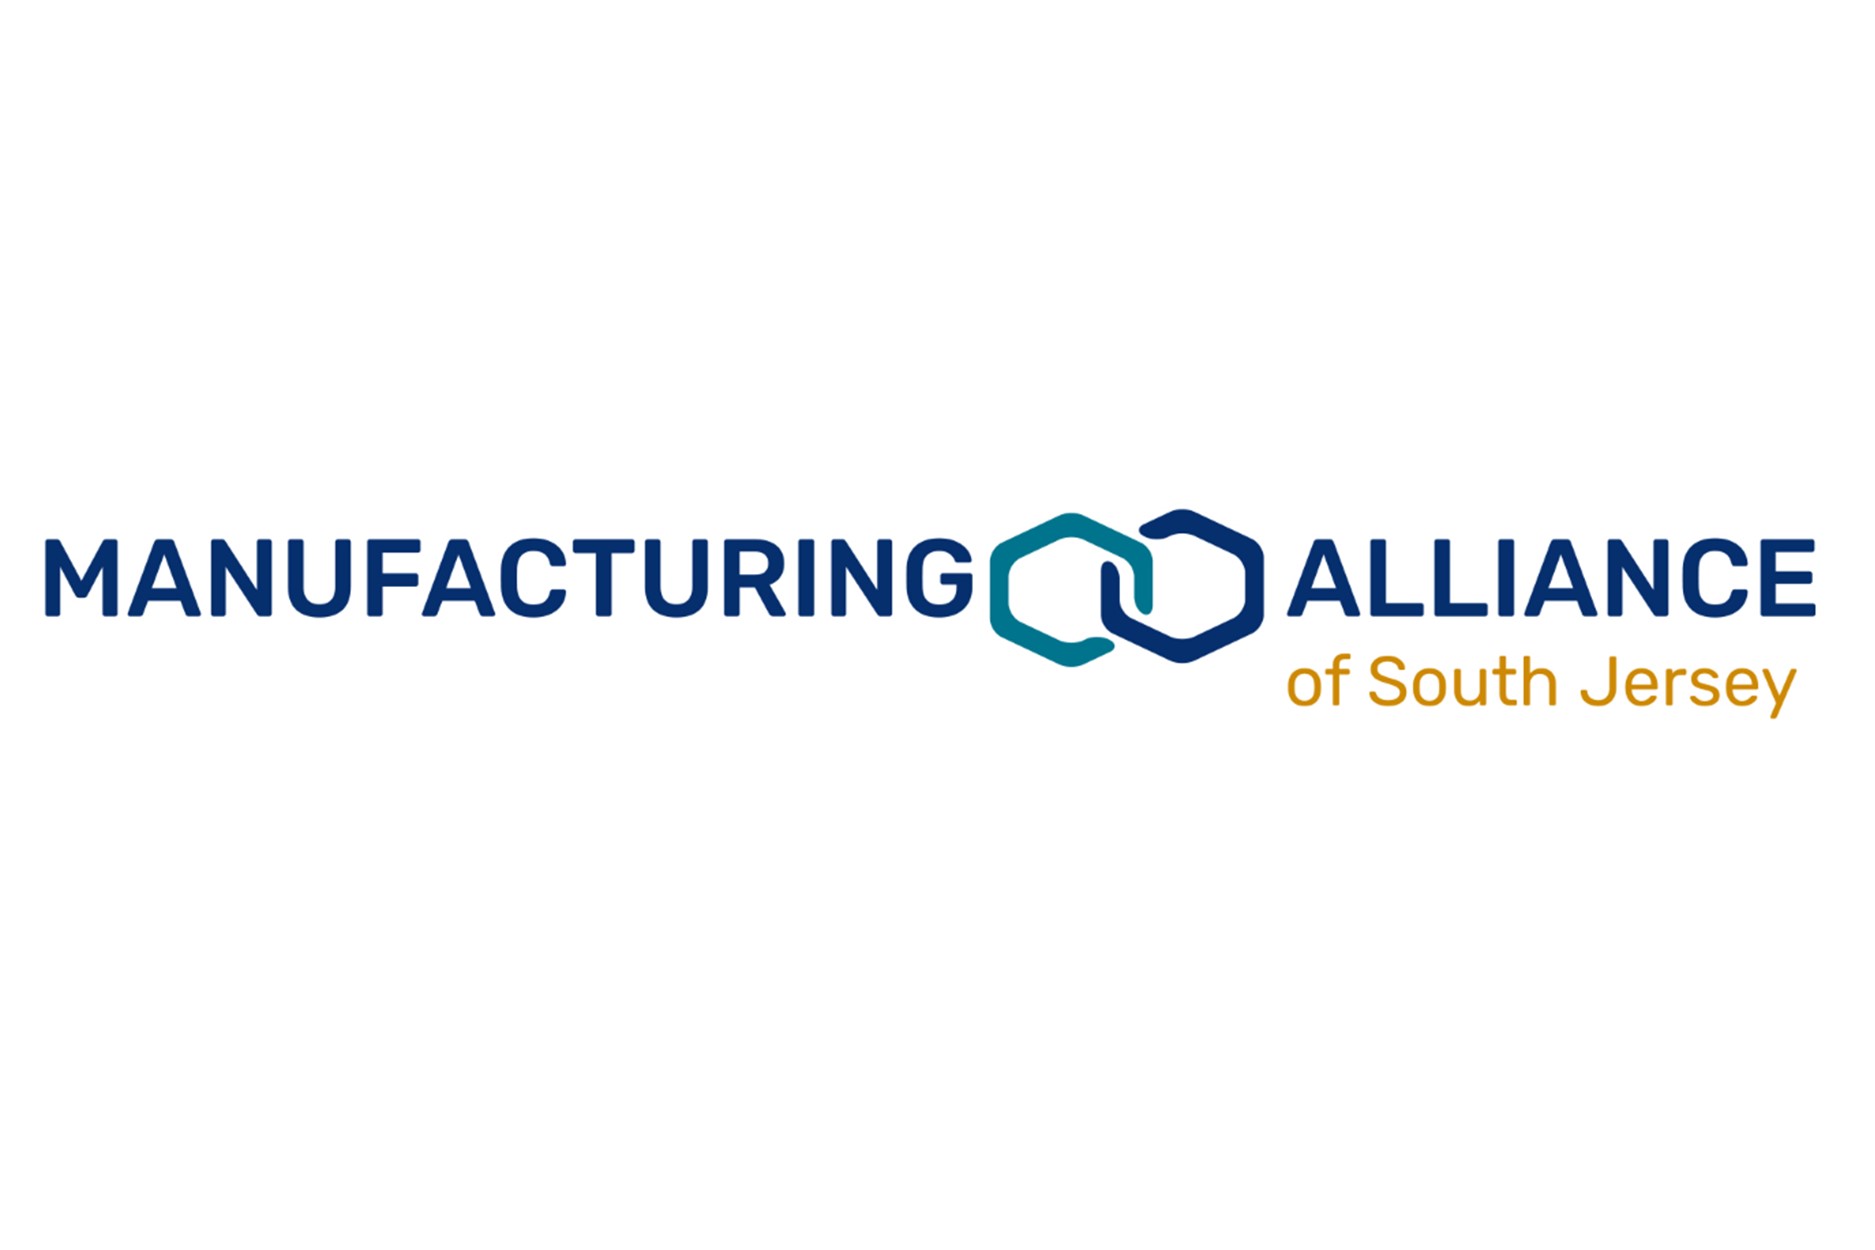 Manufacturing Alliance of South Jersey logo